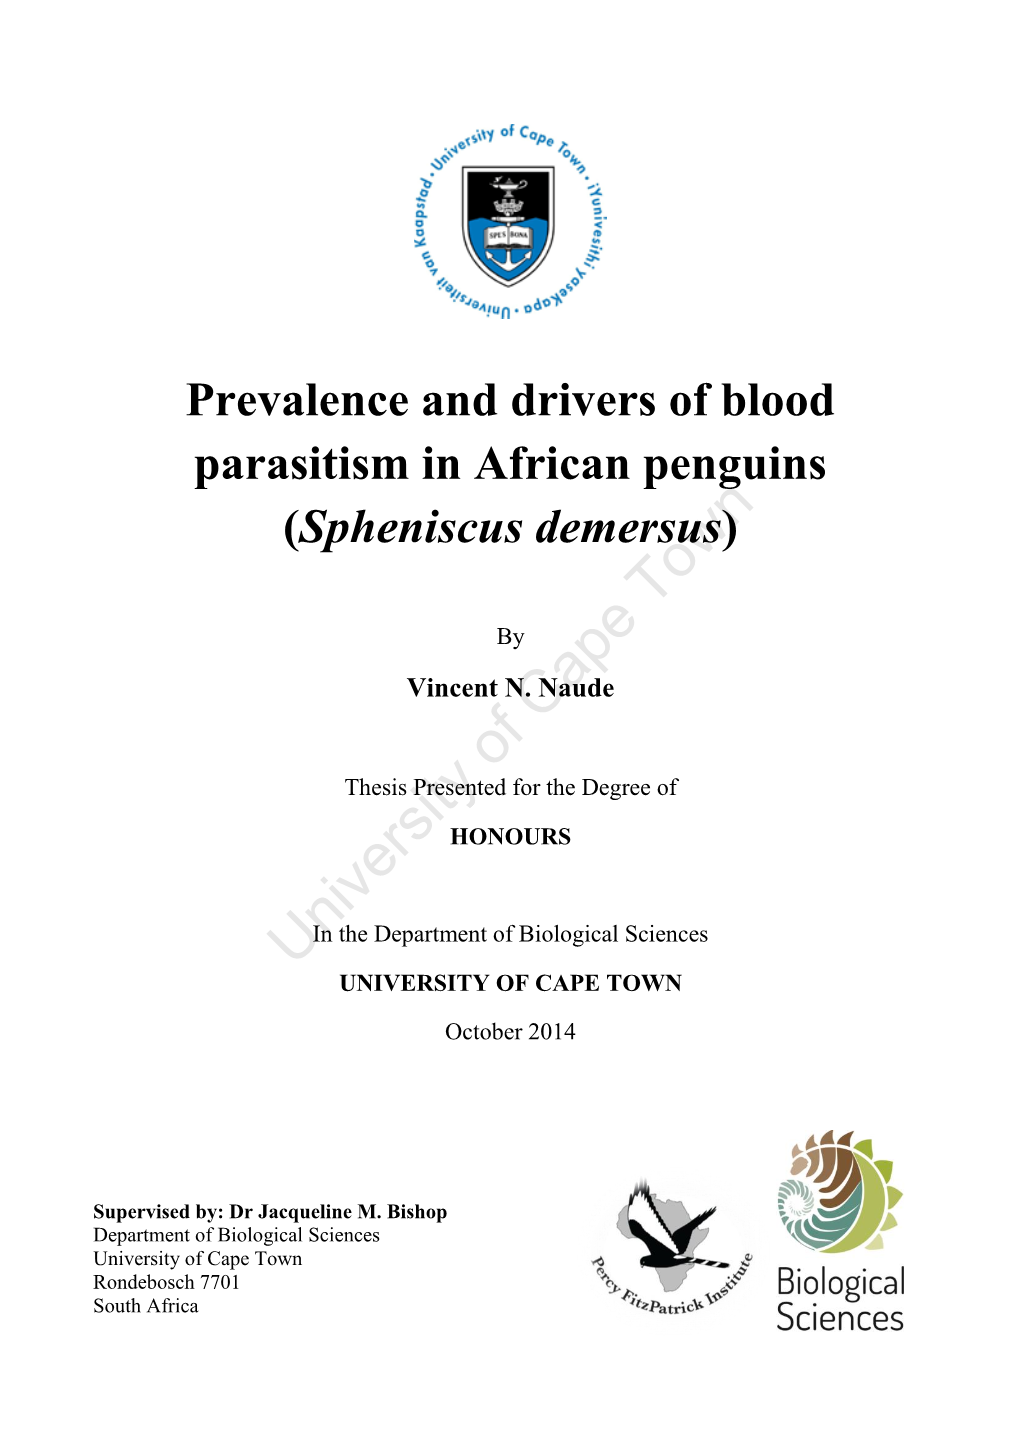 Prevalence and Drivers of Blood Parasitism in African Penguins (Spheniscus Demersus) Town by Vincent N